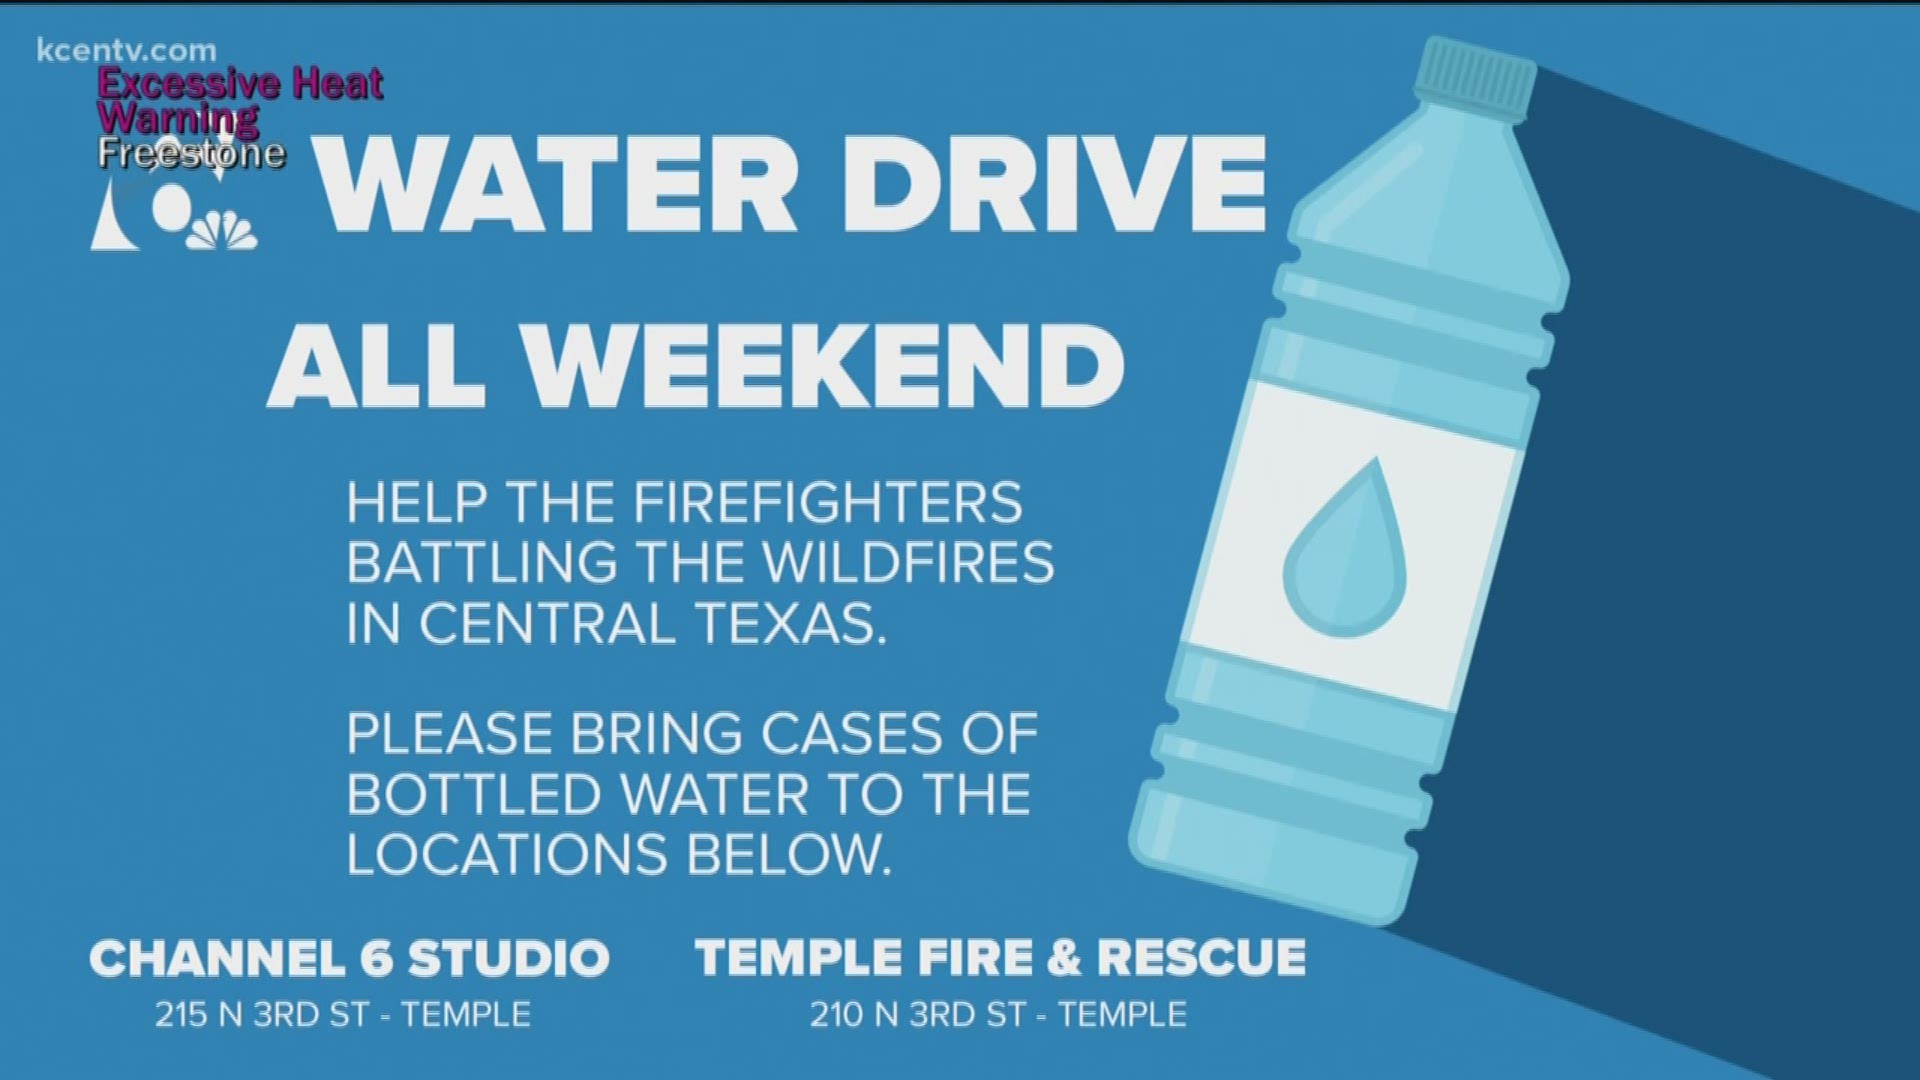 Bring bottles of water to the KCEN station or the Temple Fire Department for firefighters battling the multiple fires burning in the area.